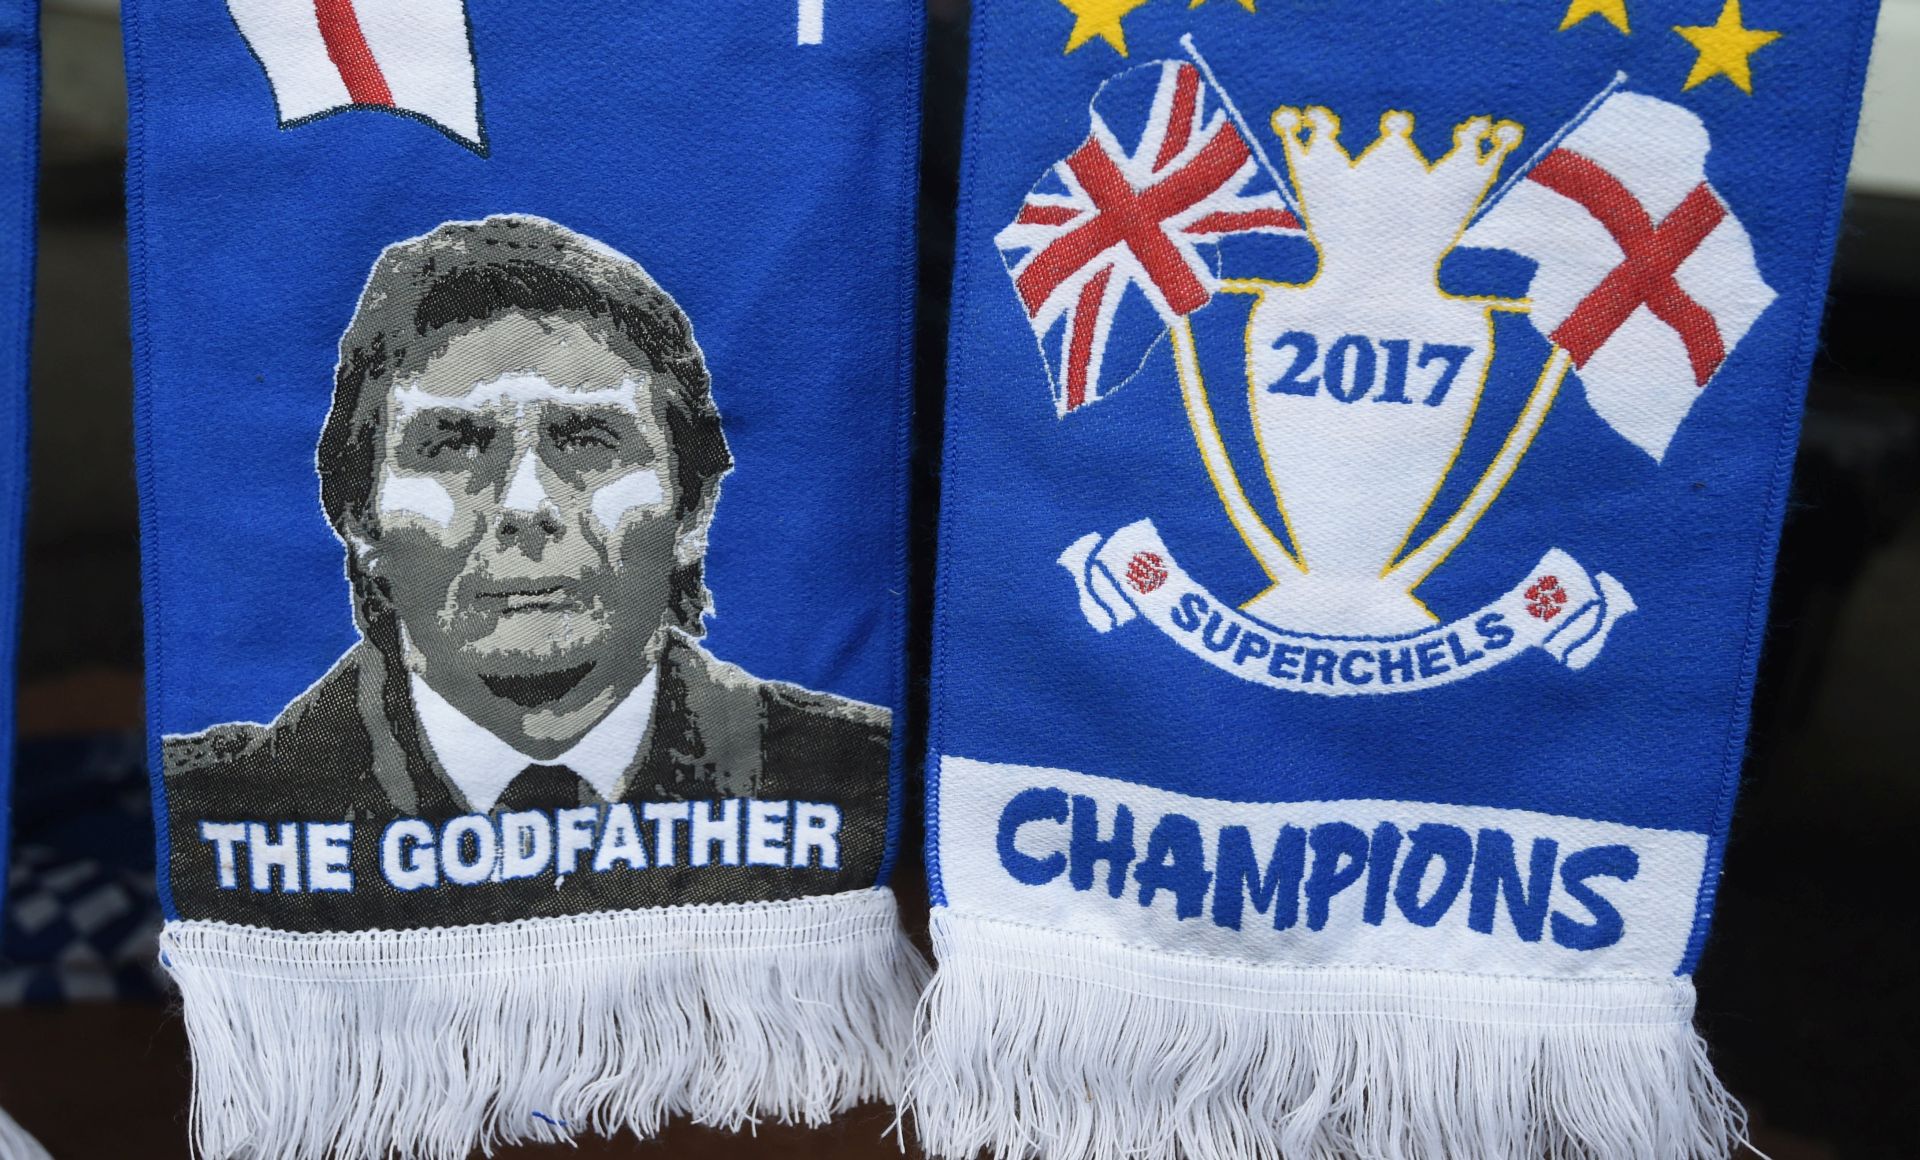 epa06435510 A scarf depicting Chelsea manager Antoino Conte is on sale ahead of the English Premier league game between Chelsea and Leicester City at Stamford Bridgein London, Britain, 13 January 2018.  EPA/FACUNDO ARRIZABALAGA EDITORIAL USE ONLY. No use with unauthorized audio, video, data, fixture lists, club/league logos or 'live' services. 
Online in-match use limited to 75 images, no video emulation. No use in betting, games or single club/league/player publications